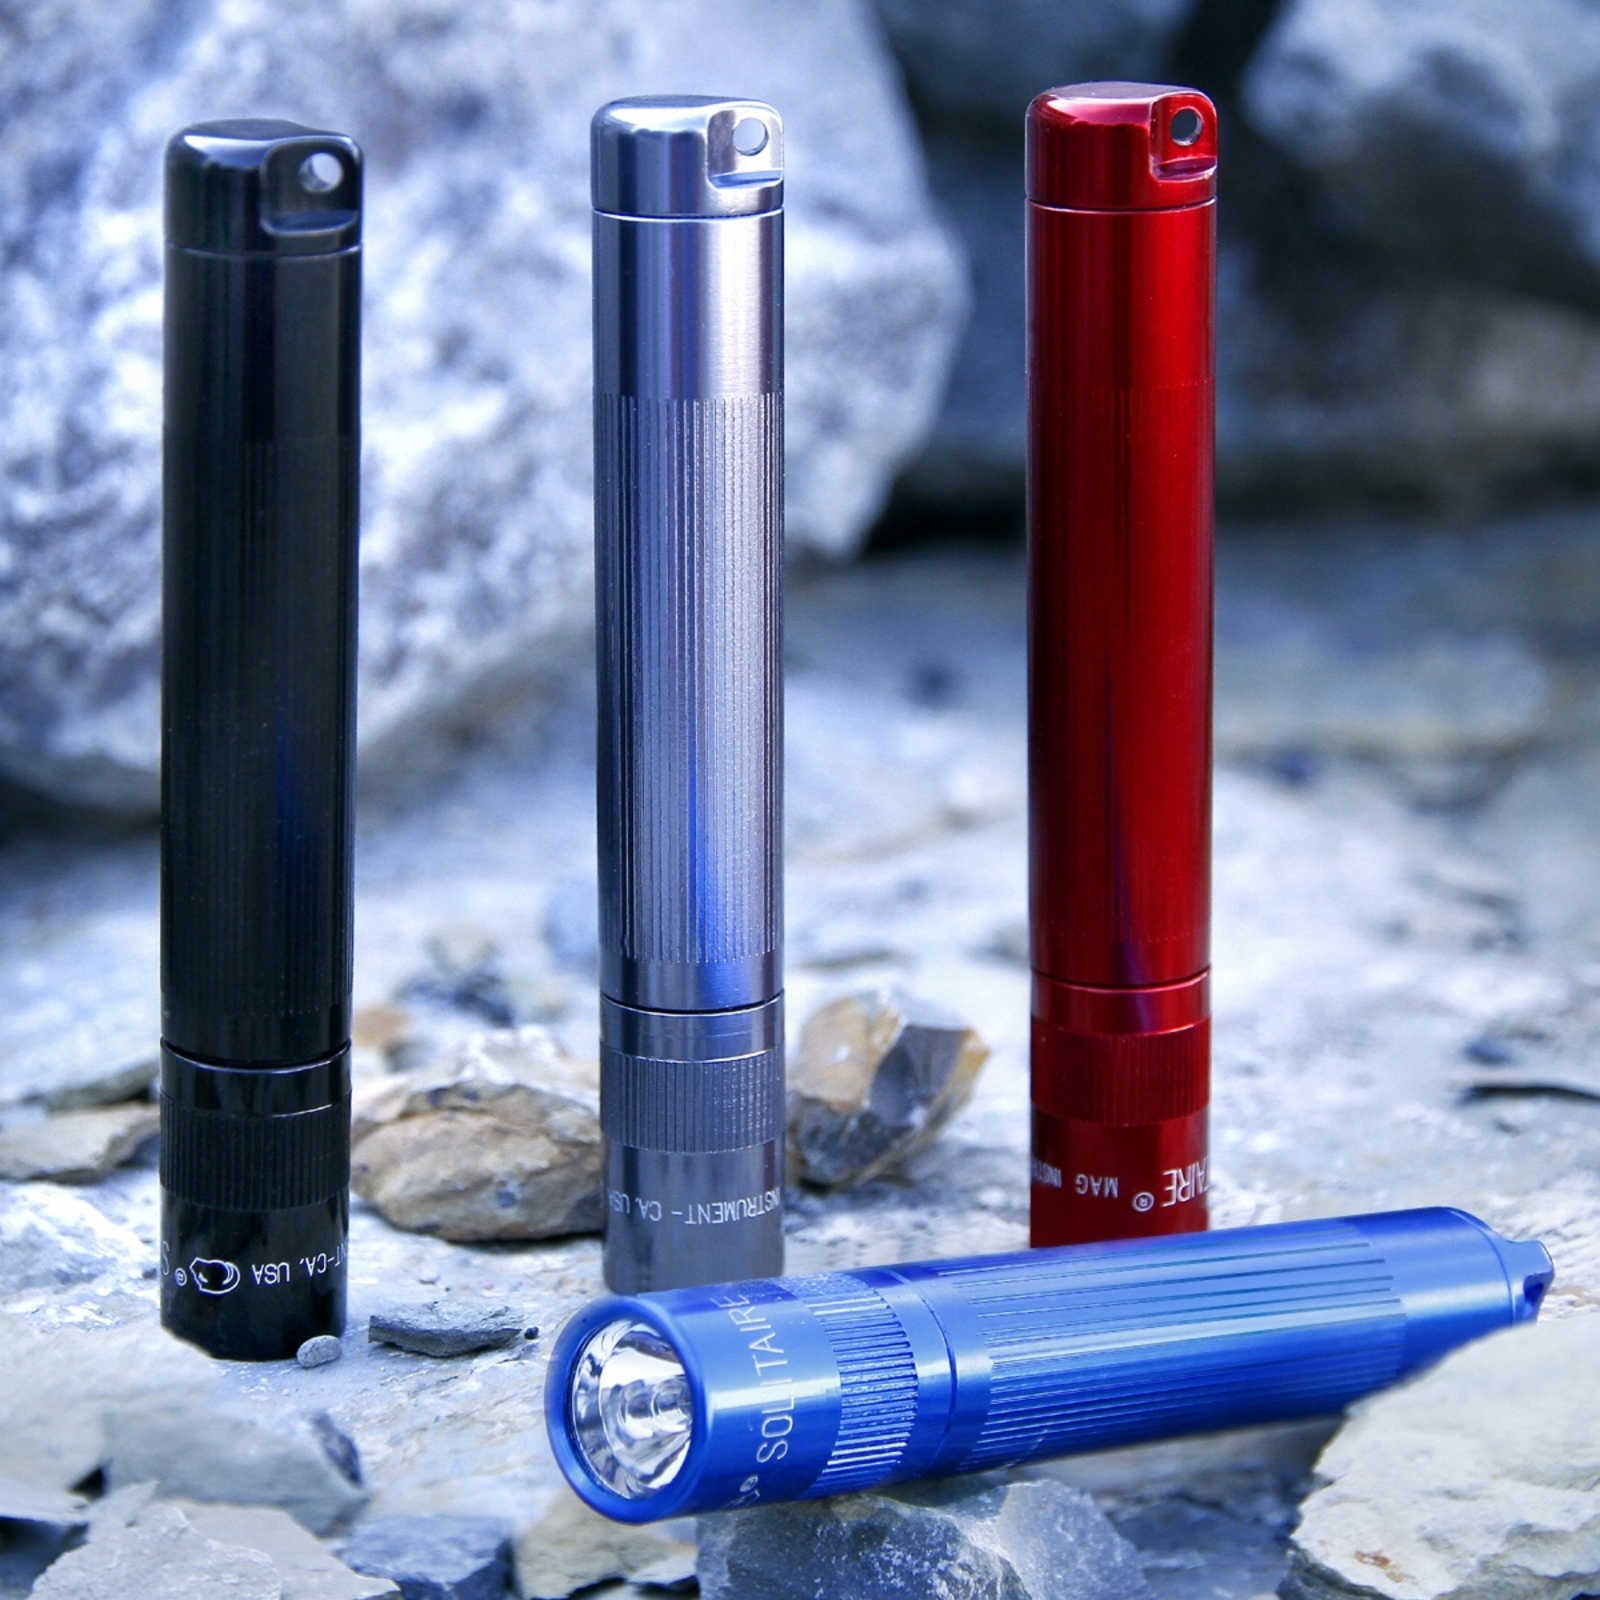 Maglite Solitaire zaklamp in rood